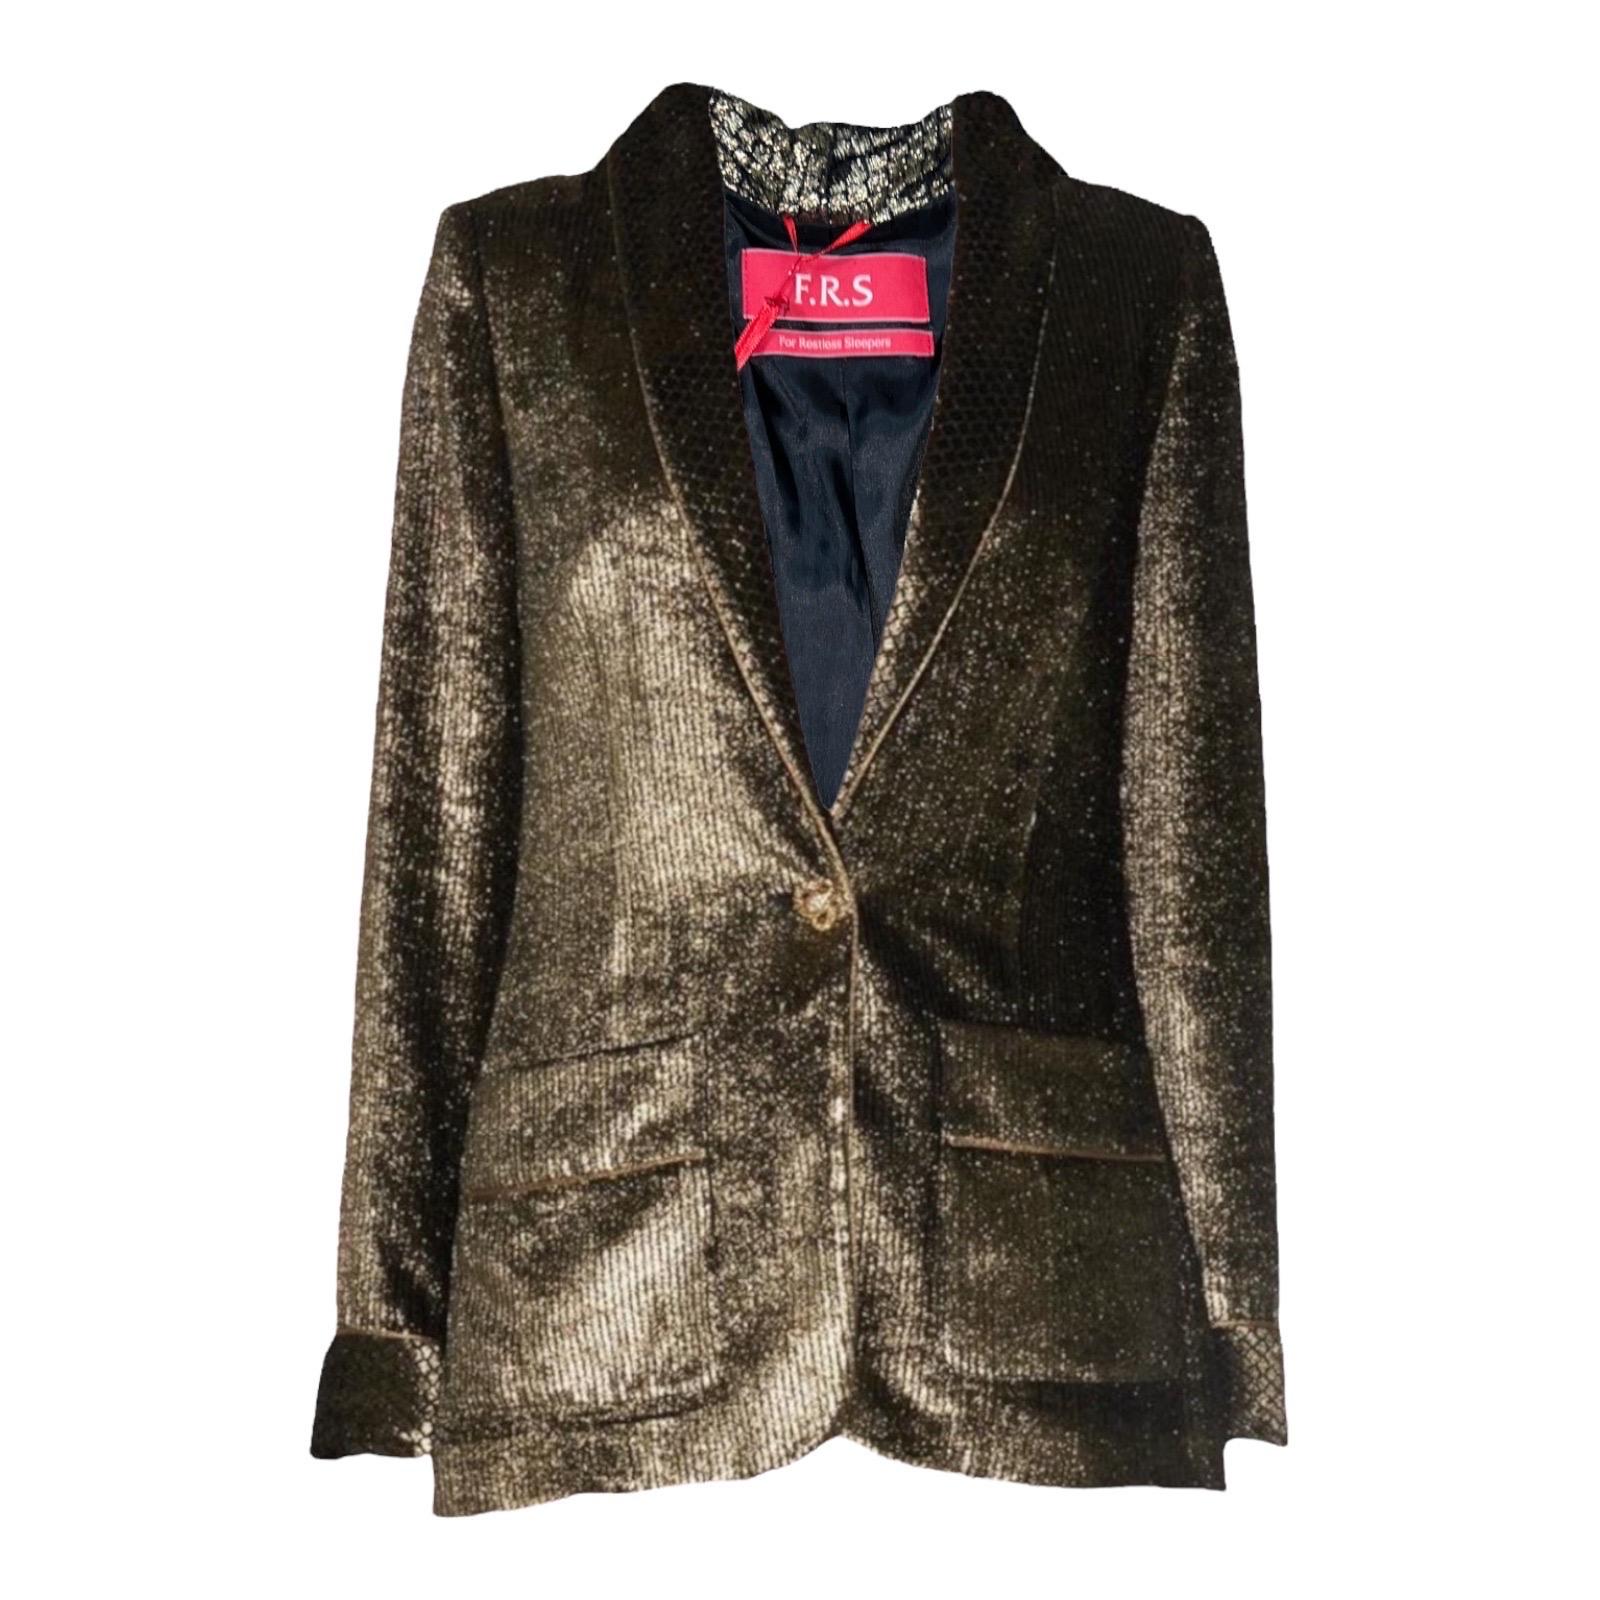 A stunning metallic antique-gold silky velvet evening tuxedo suit by FOR RESTLESS SLEEPERS FRS

F.R.S tuxedo jacket is cut in a tailored fit, finished with velvet borders. The loose-fit silhouette with a crystal-encrusted button in snake-design